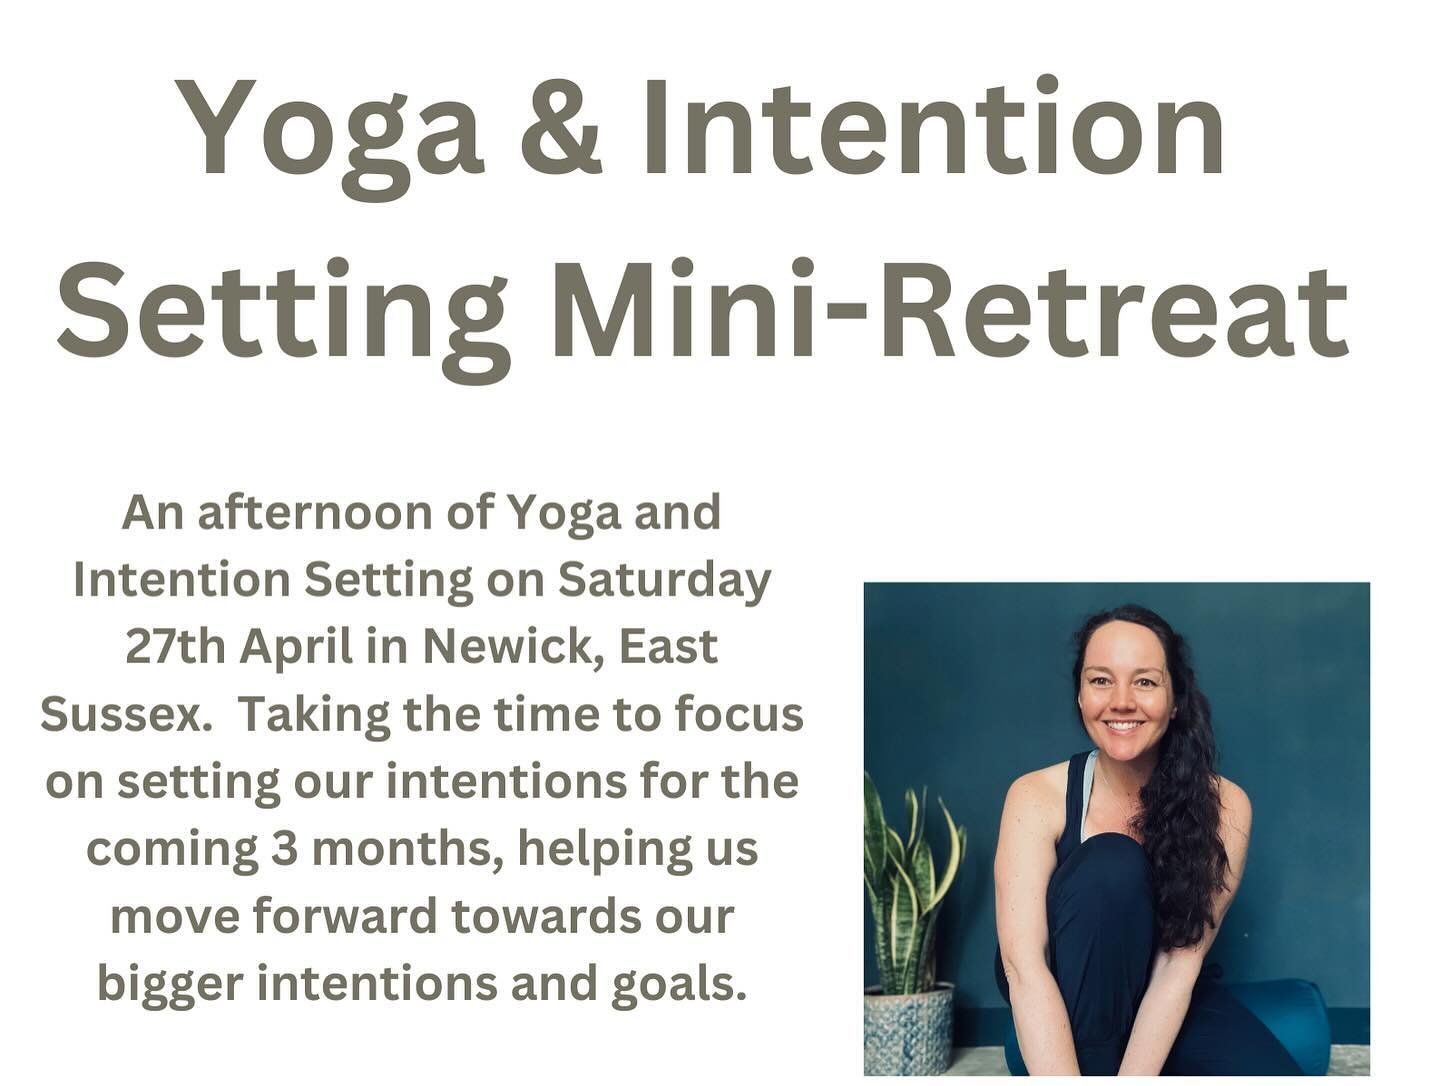 Yoga and Intention Setting Mini Retreat coming up in 2 weeks time.  Spaces available. Head to my website link in bio and click on Yoga and Retreats to book on. 

Some of the Feedback from previous events:

&ldquo;The Saturday afternoon was delightful